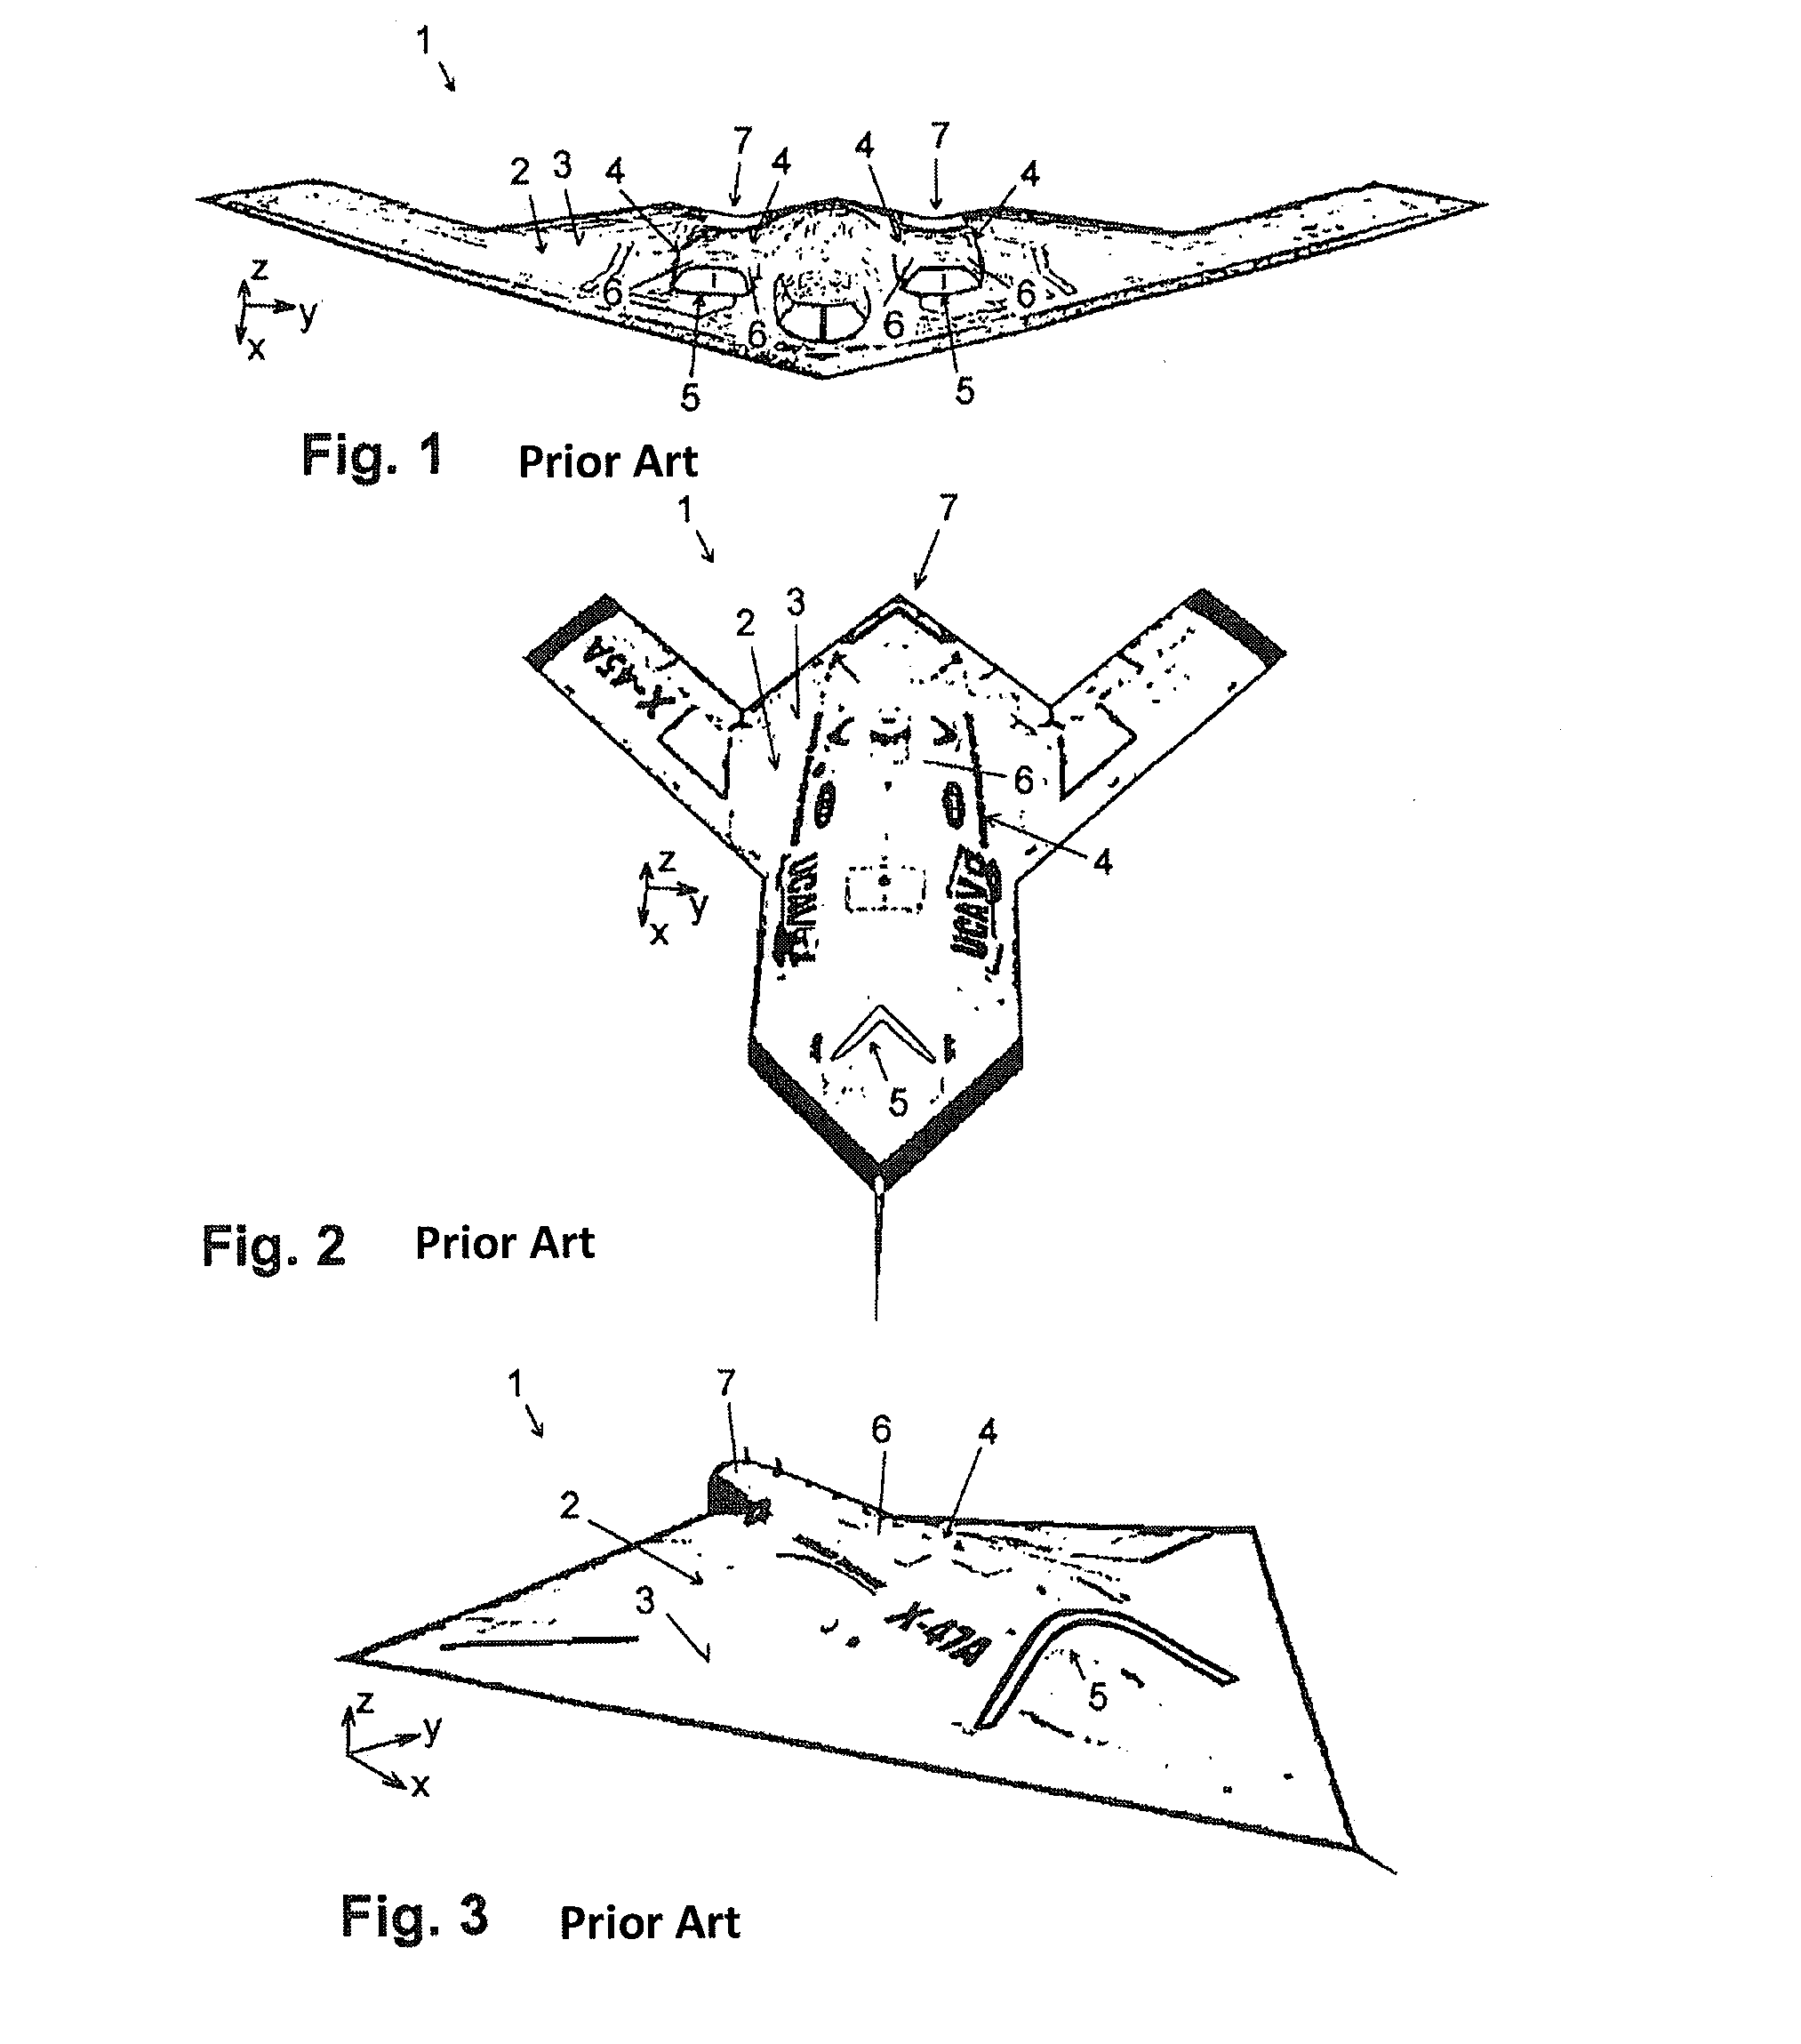 Driven Aircraft, in Particular to an Aircraft Designed as a Flying Wing and/or Having a Low Radar Signature